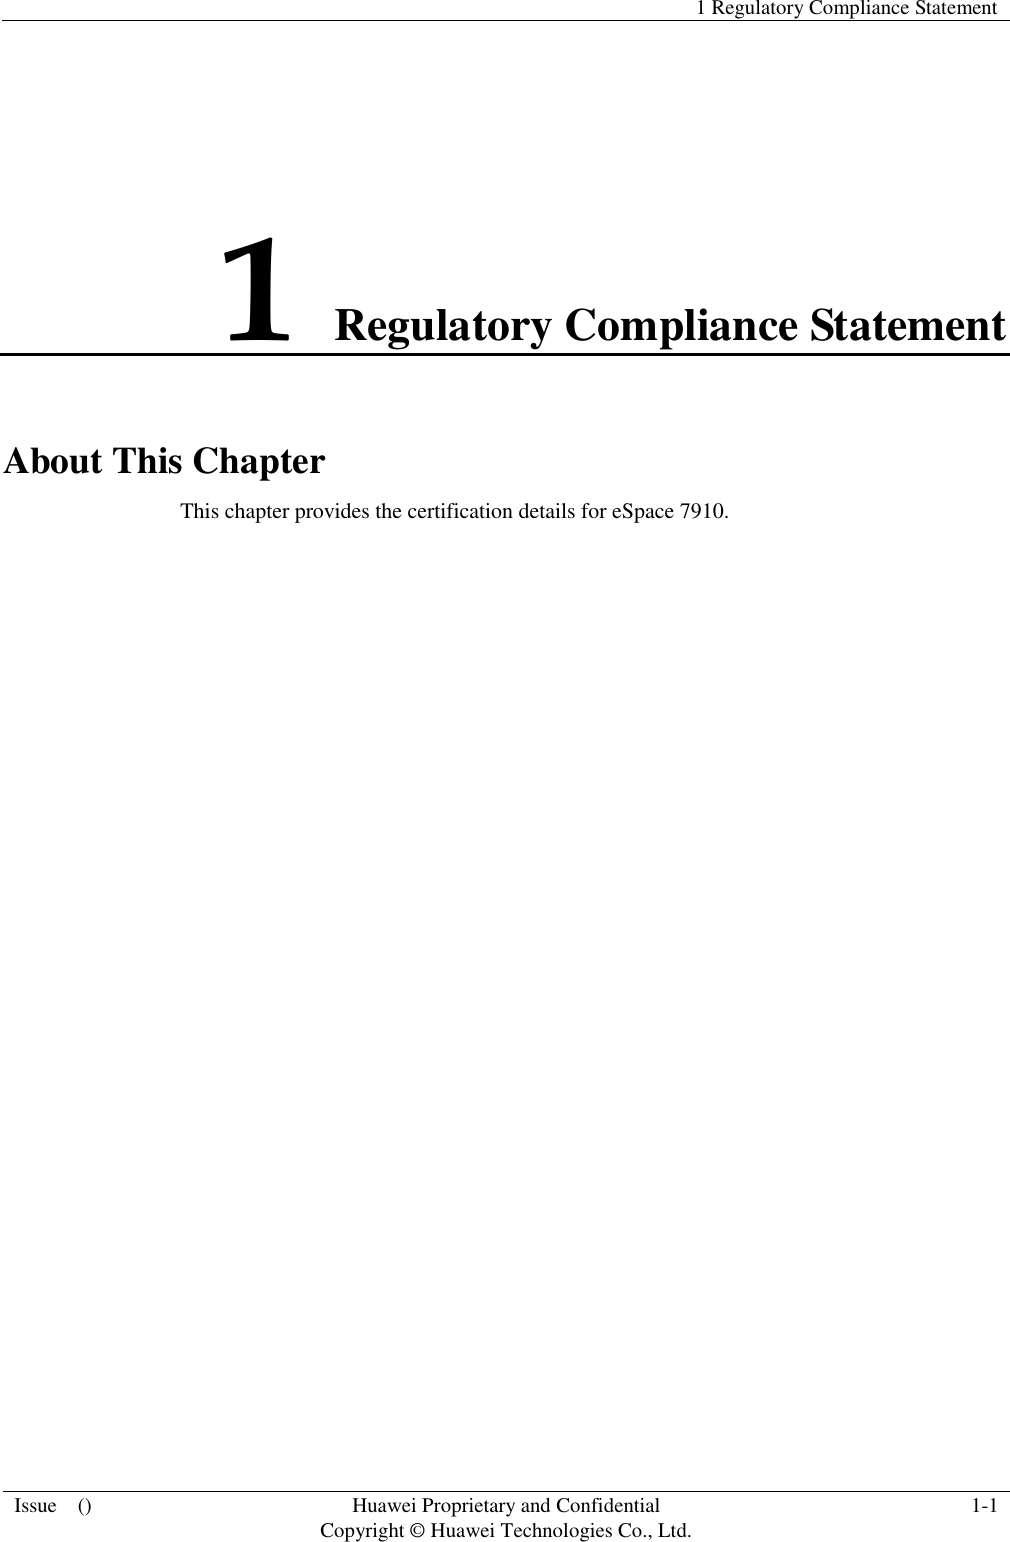   1 Regulatory Compliance Statement  Issue    () Huawei Proprietary and Confidential                                     Copyright © Huawei Technologies Co., Ltd. 1-1  1 Regulatory Compliance Statement About This Chapter This chapter provides the certification details for eSpace 7910.  